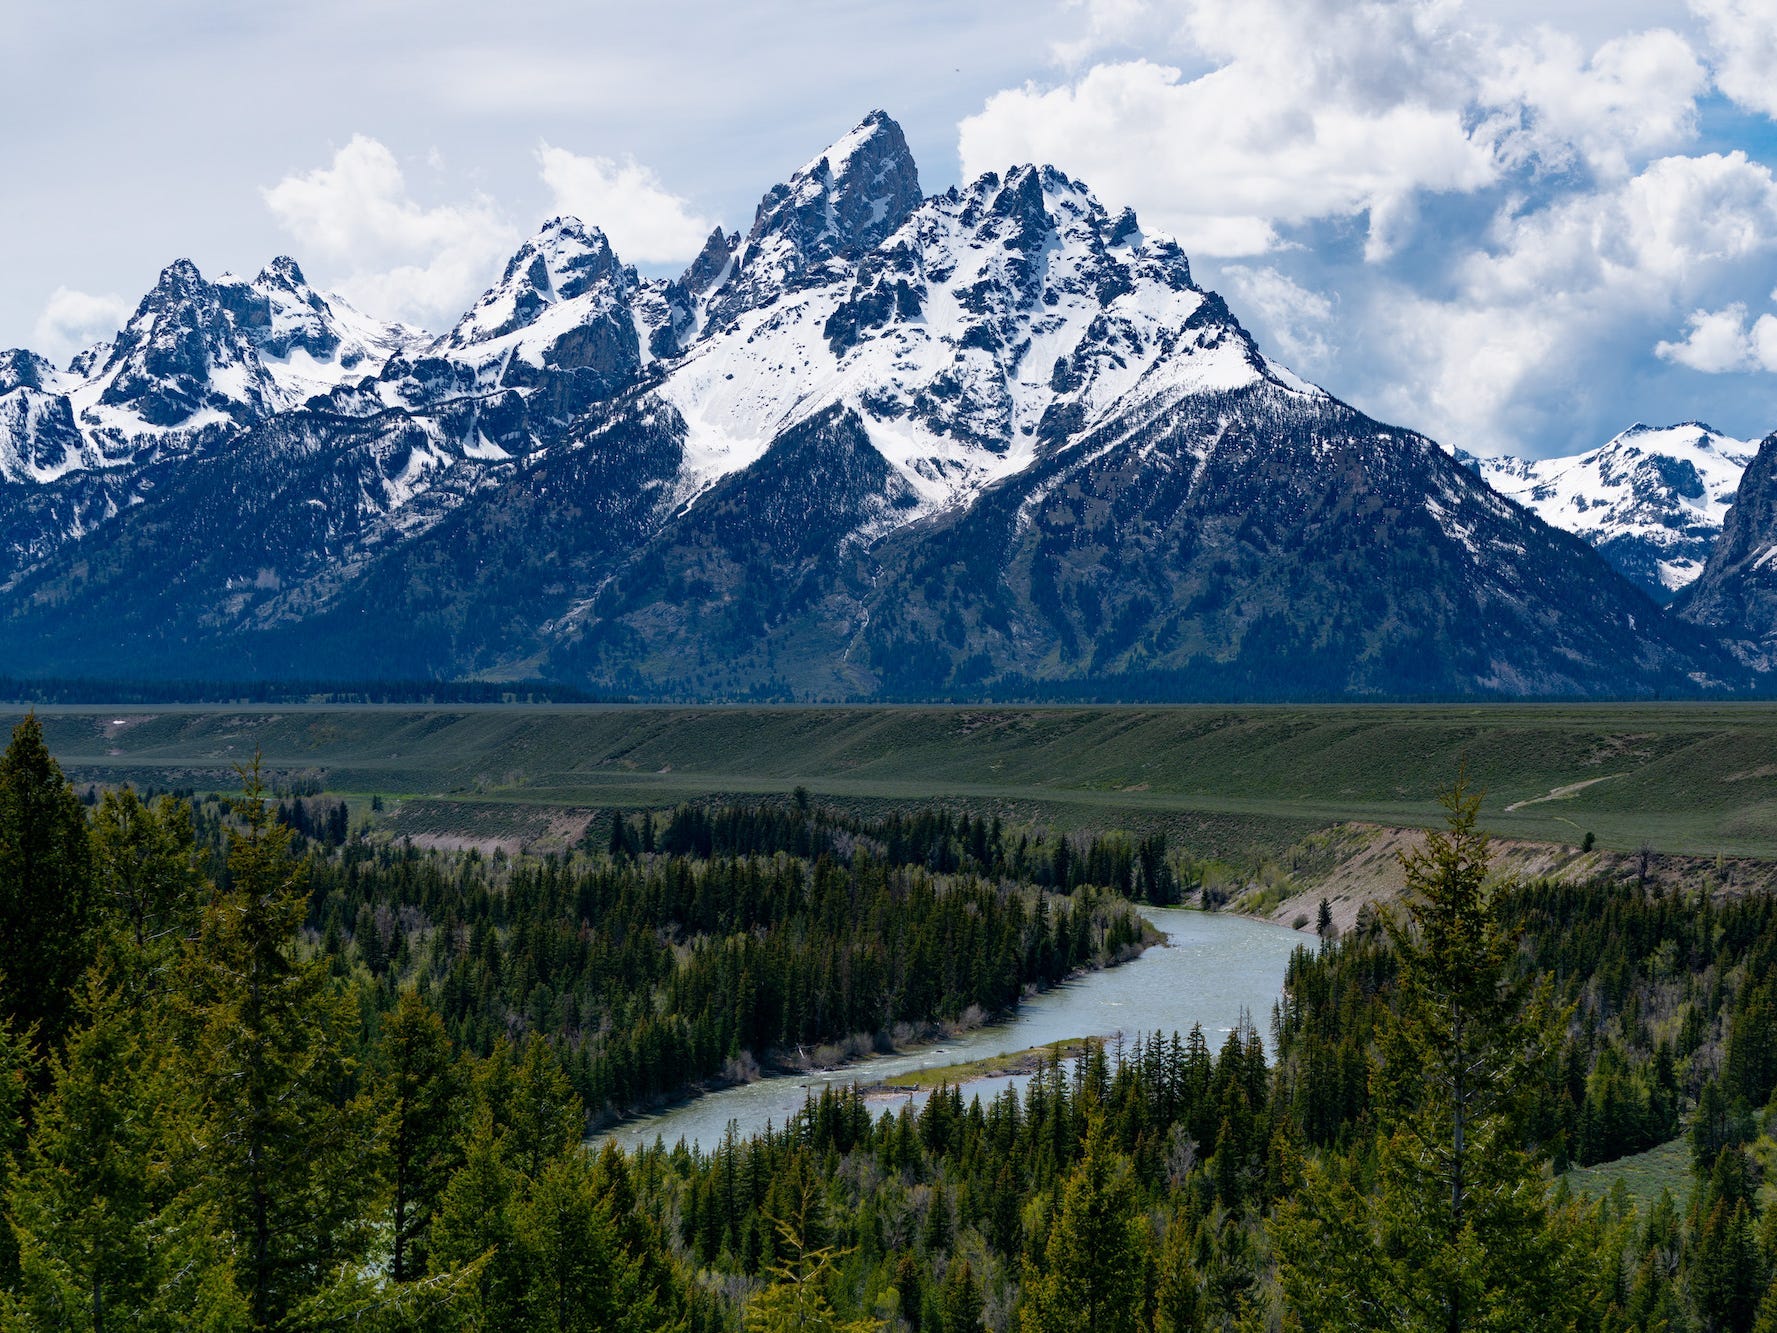 General Views of the Grand Tetons at the Snake River on May 28, 2021 in Grand Teton National Park, Wyoming.